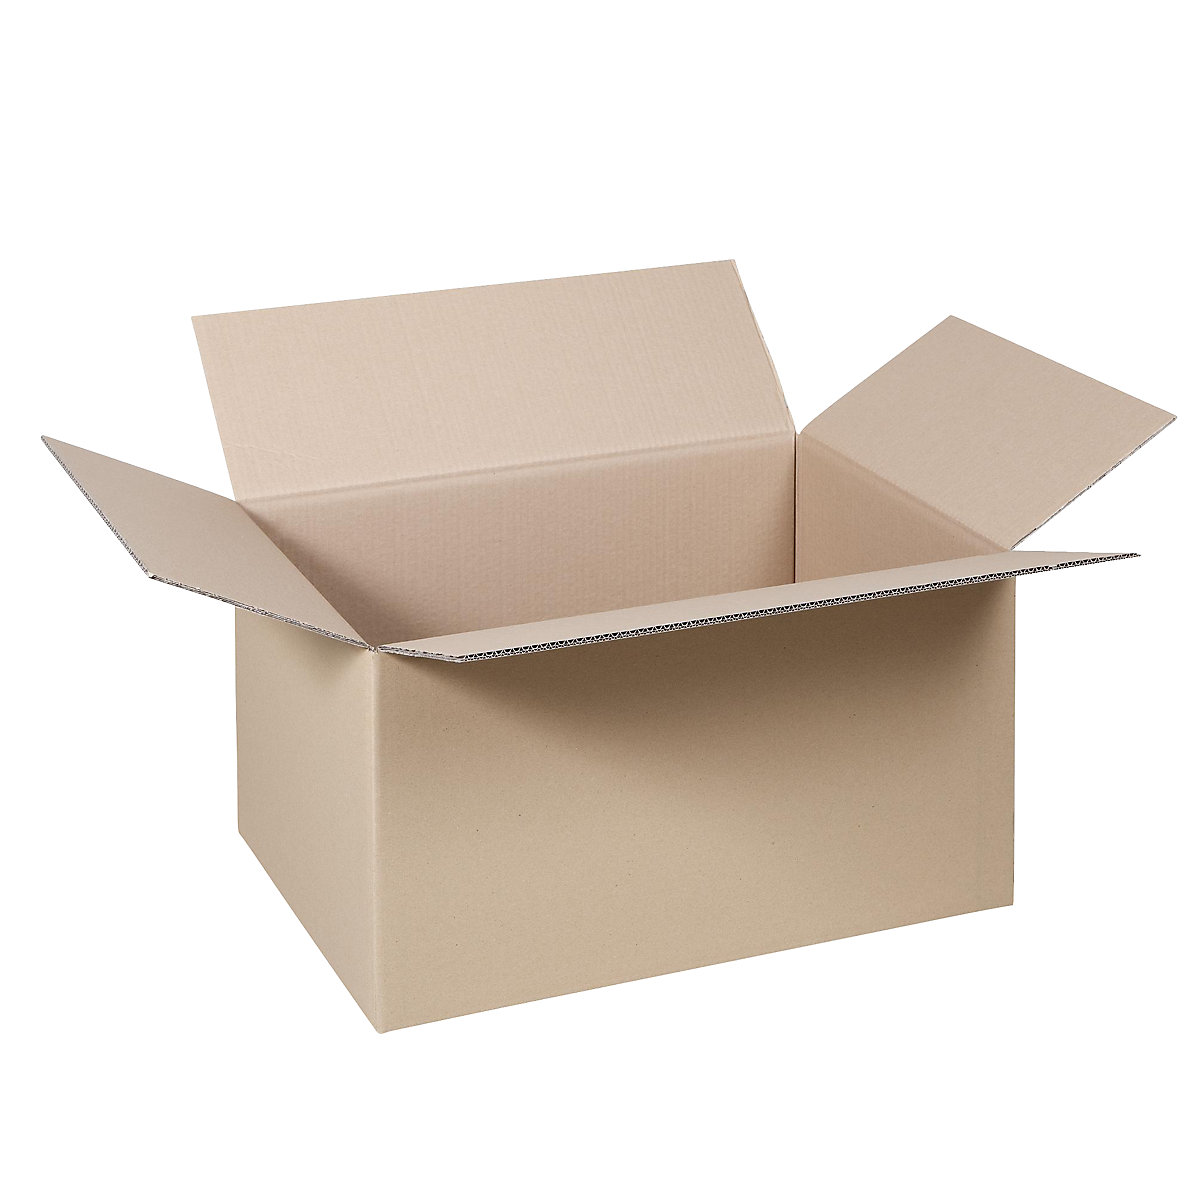 Folding cardboard box, FEFCO 0201, made of double fluted cardboard, internal dimensions 500 x 400 x 400 mm, pack of 50-24